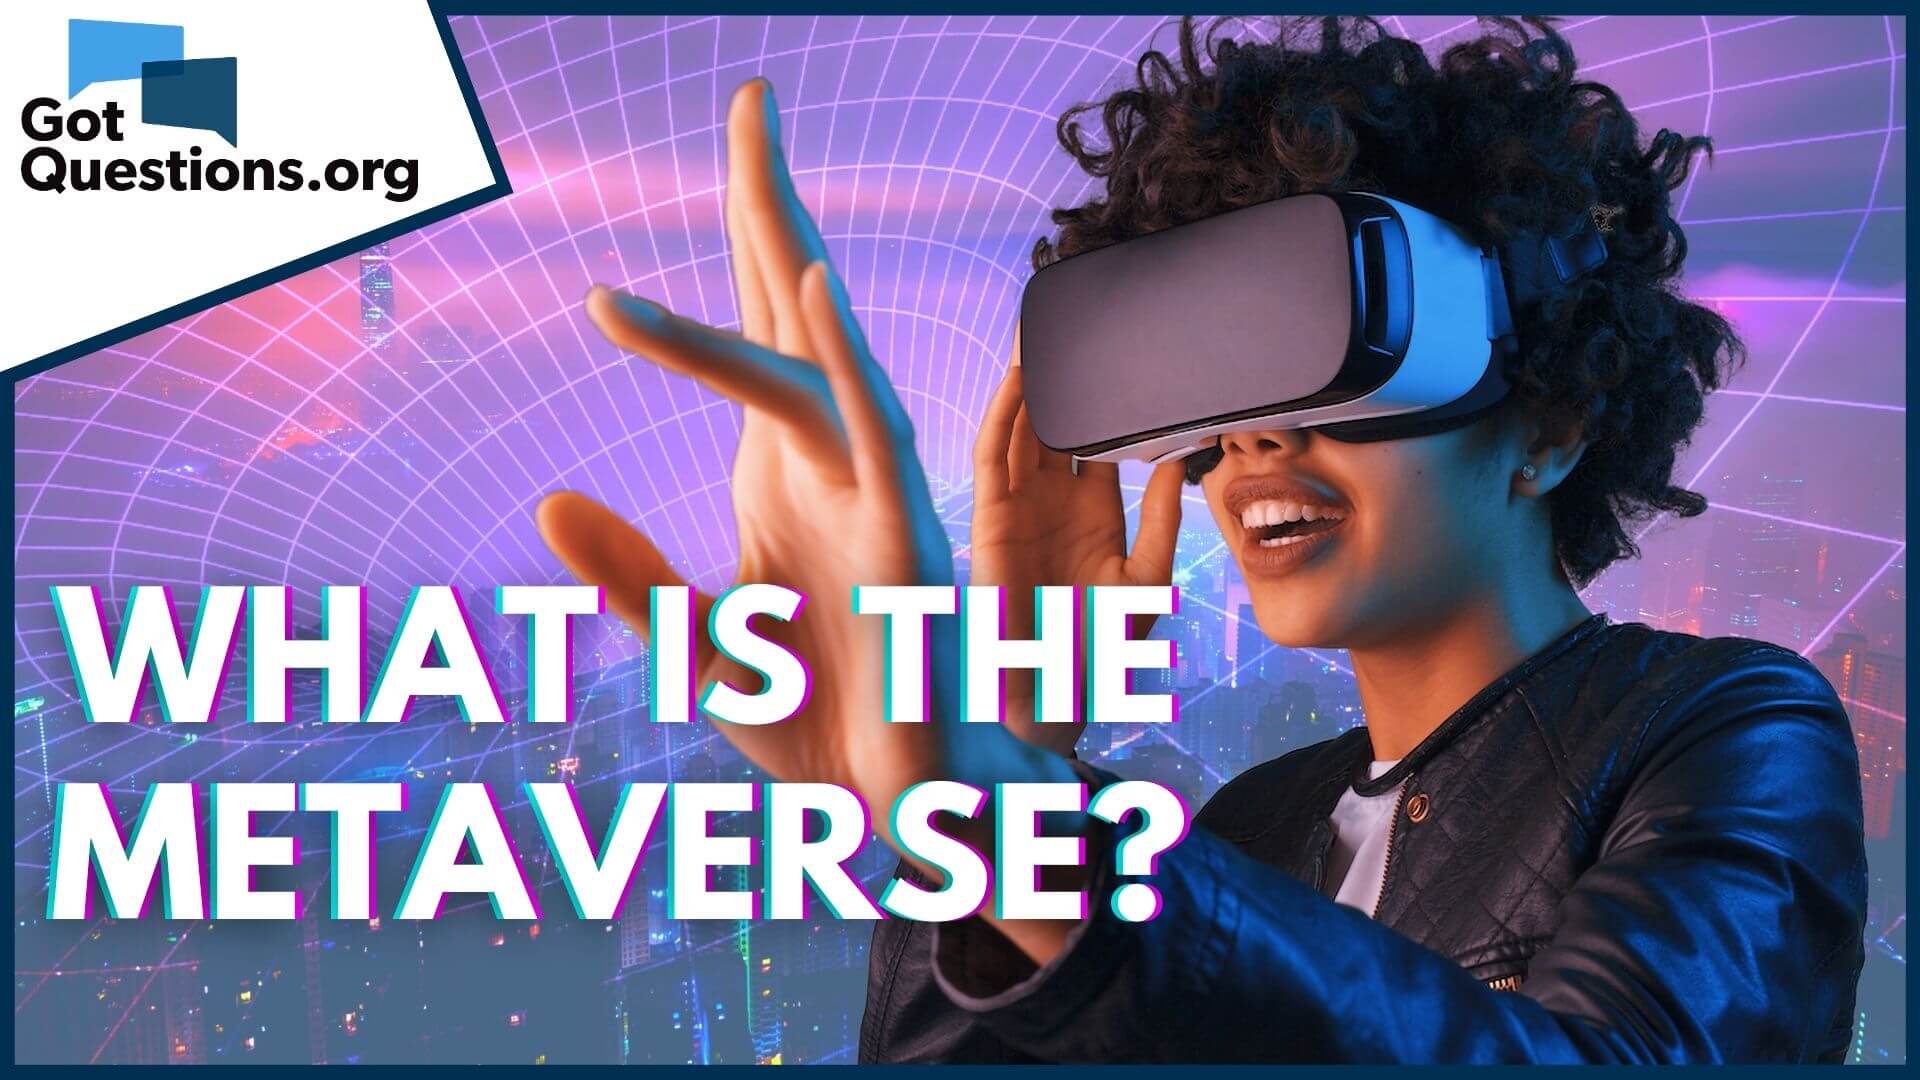 How the Metaverse is changing the way people attend church